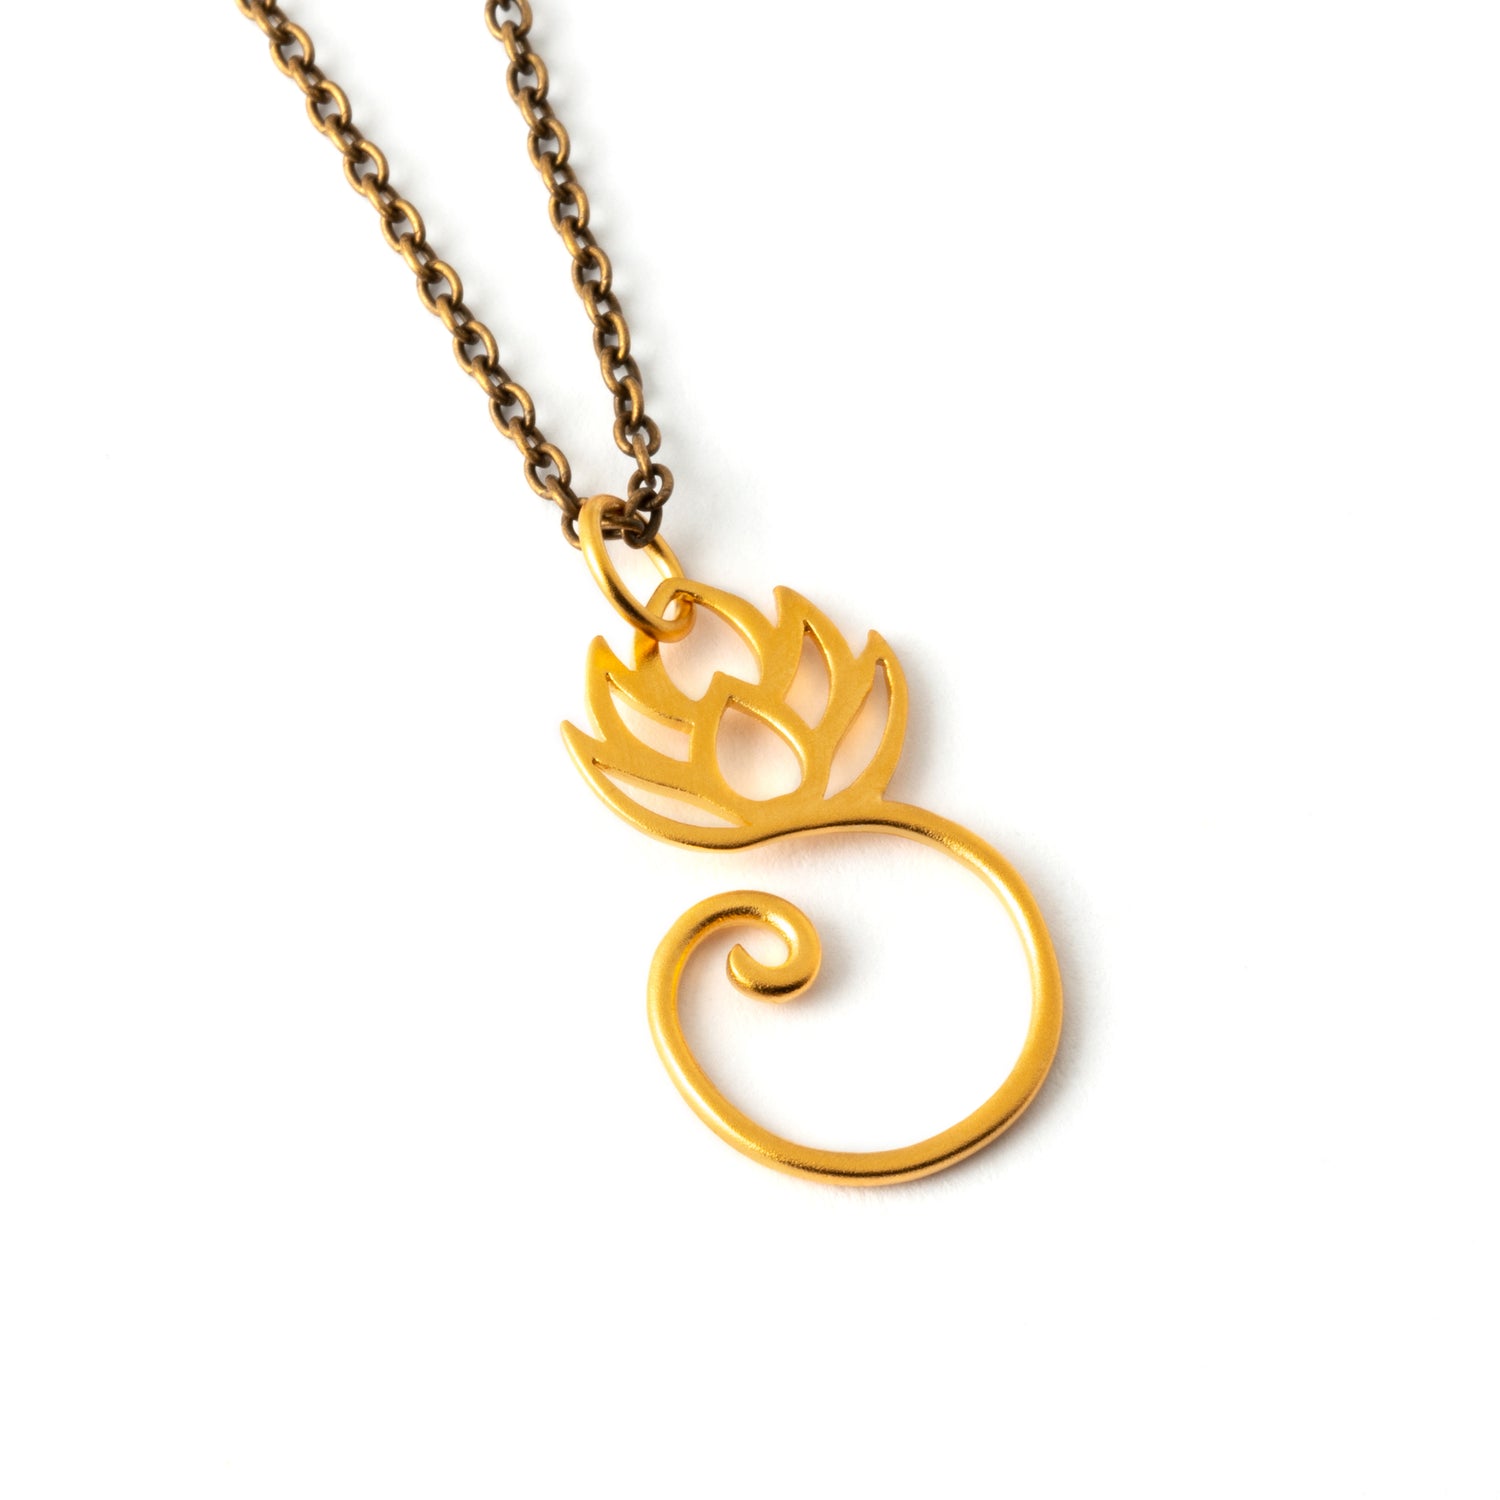 Spiralling Gold Lotus Charm necklace left side view